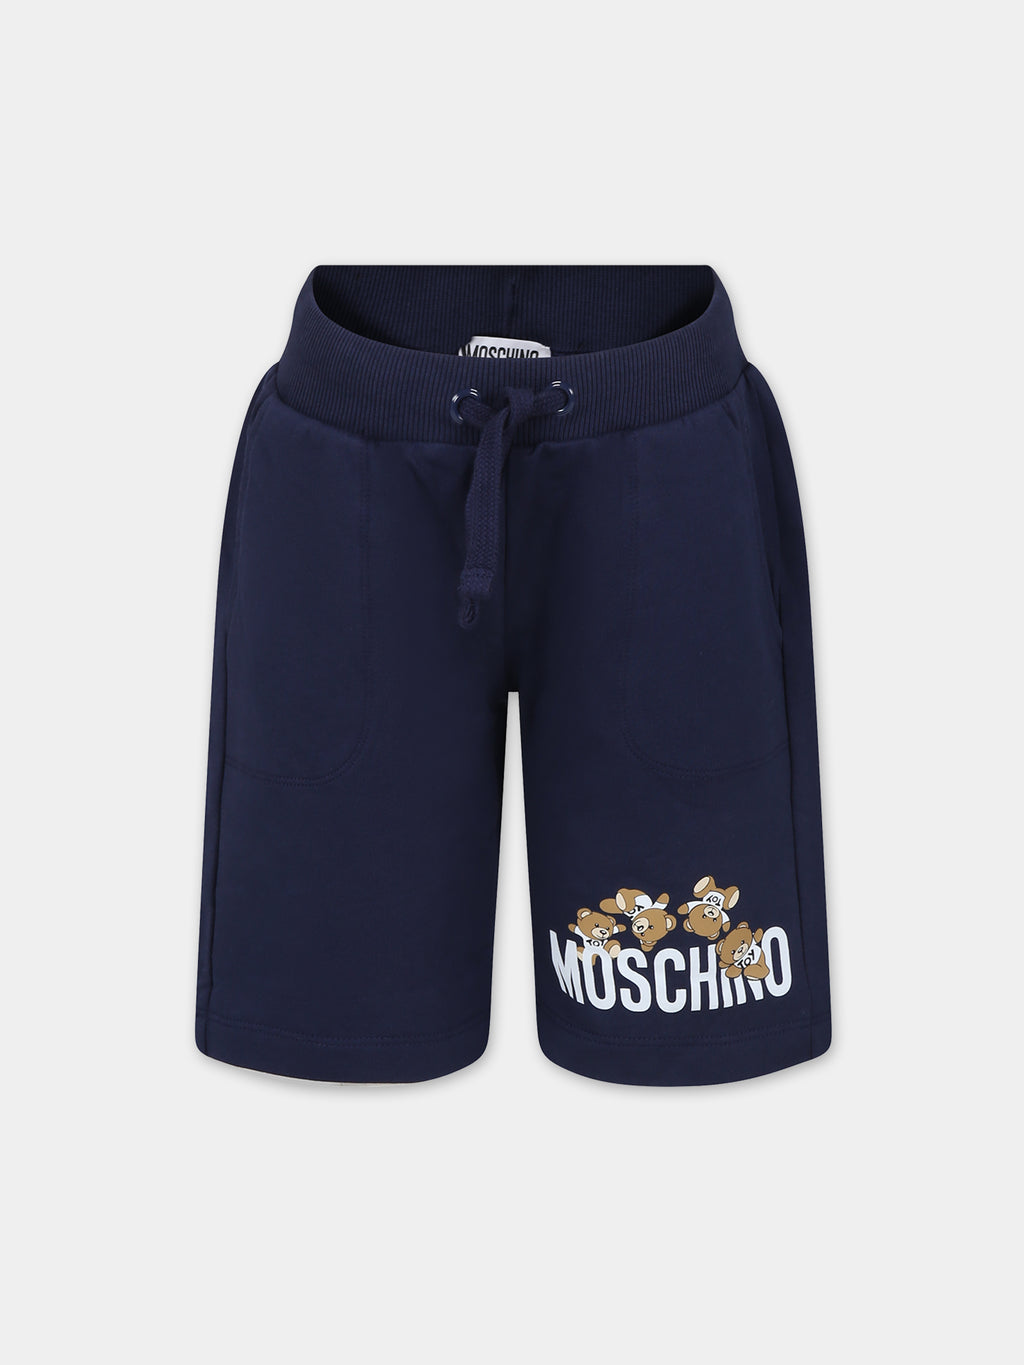 Blue shorts for kids with Teddy Bears and logo